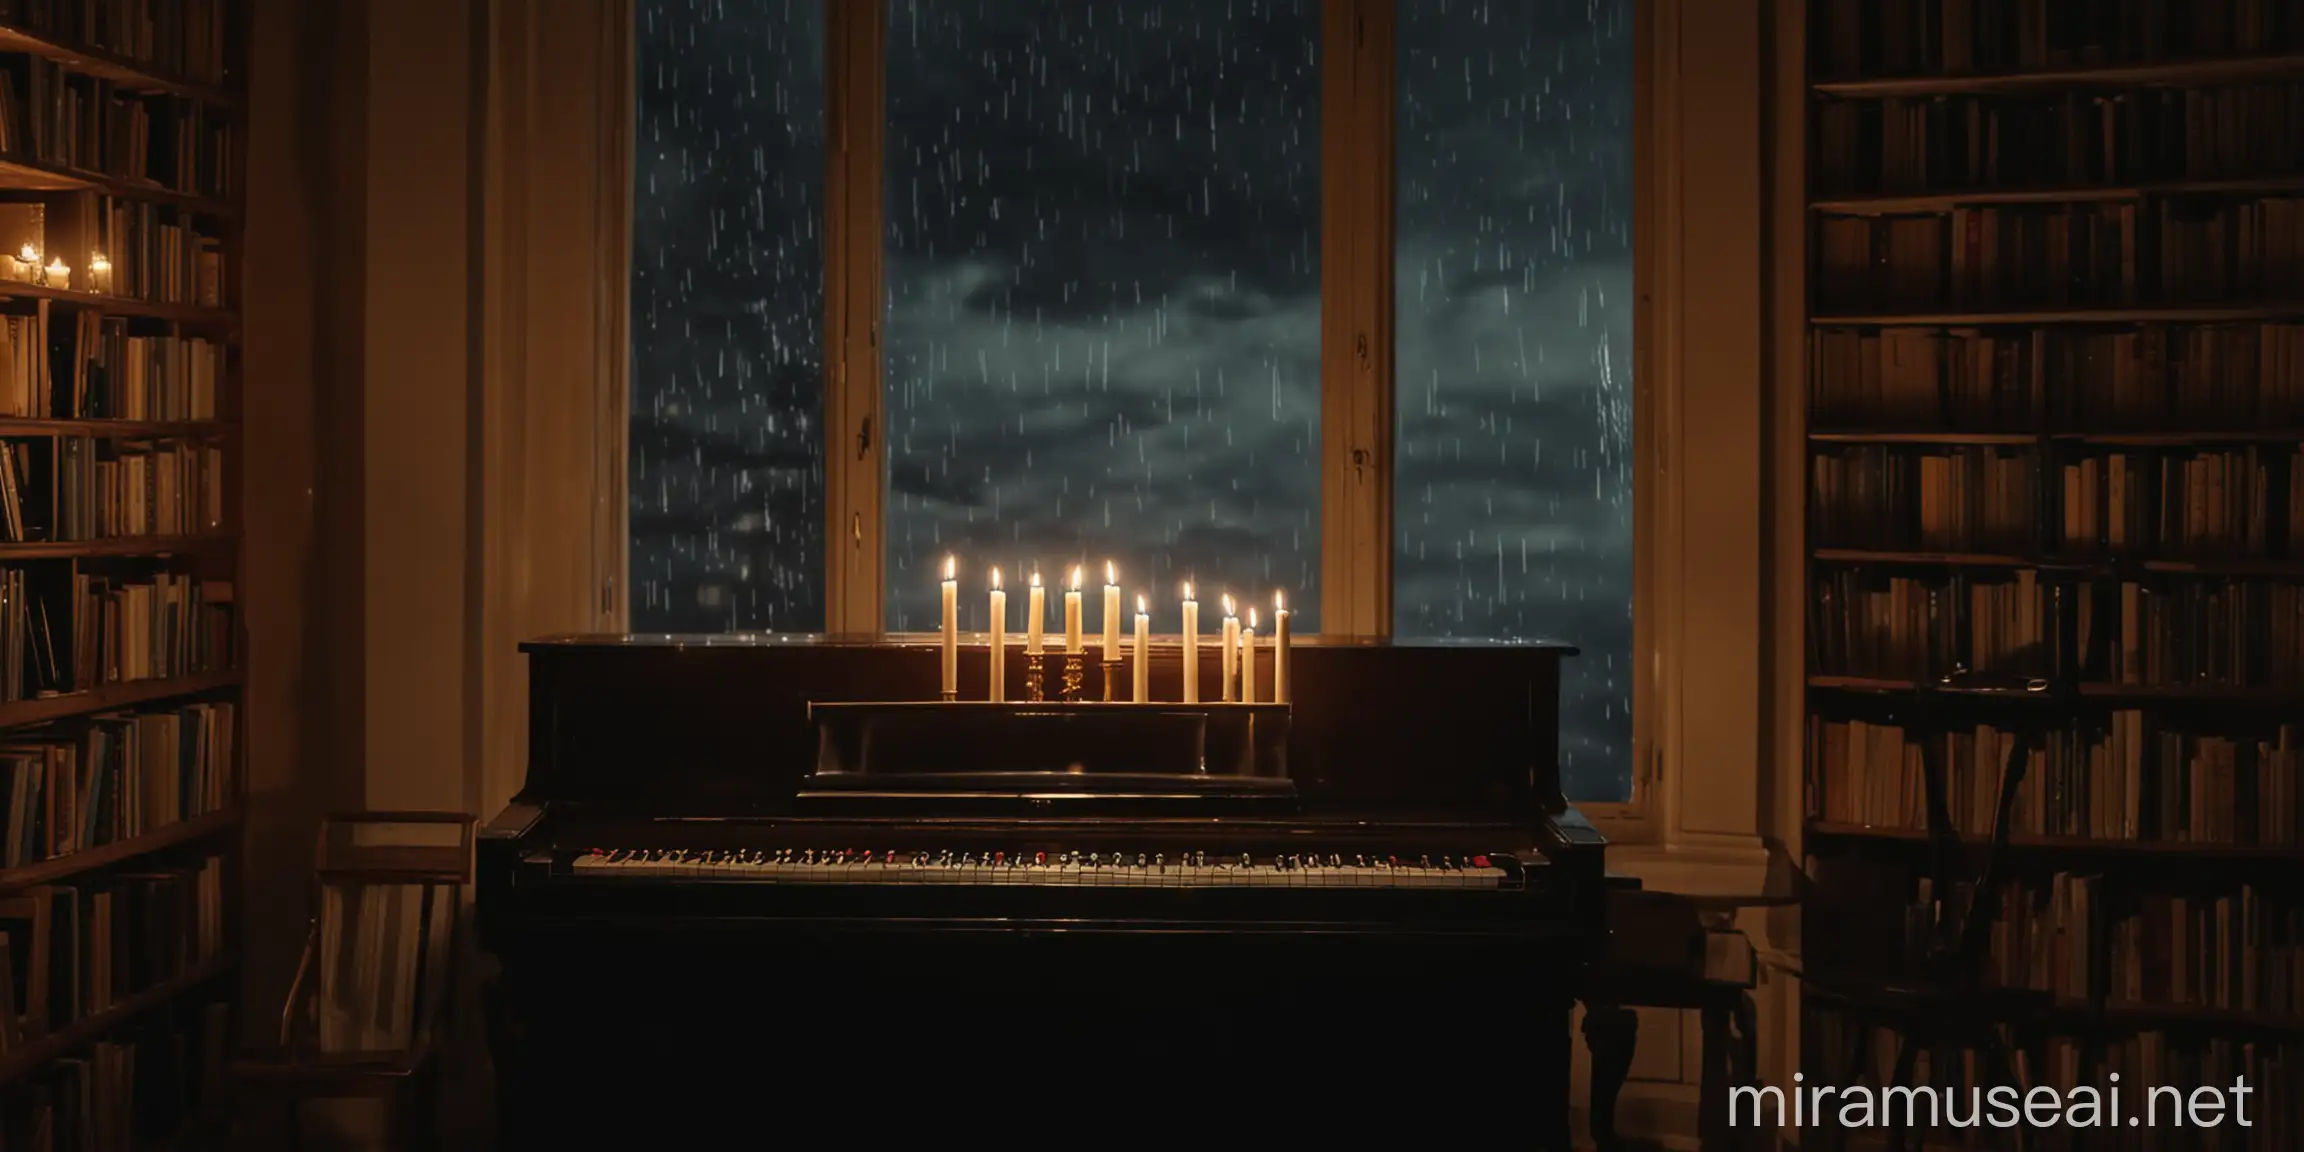 TAIL classical piano at night with candle lights in a library. 
window with storm outside